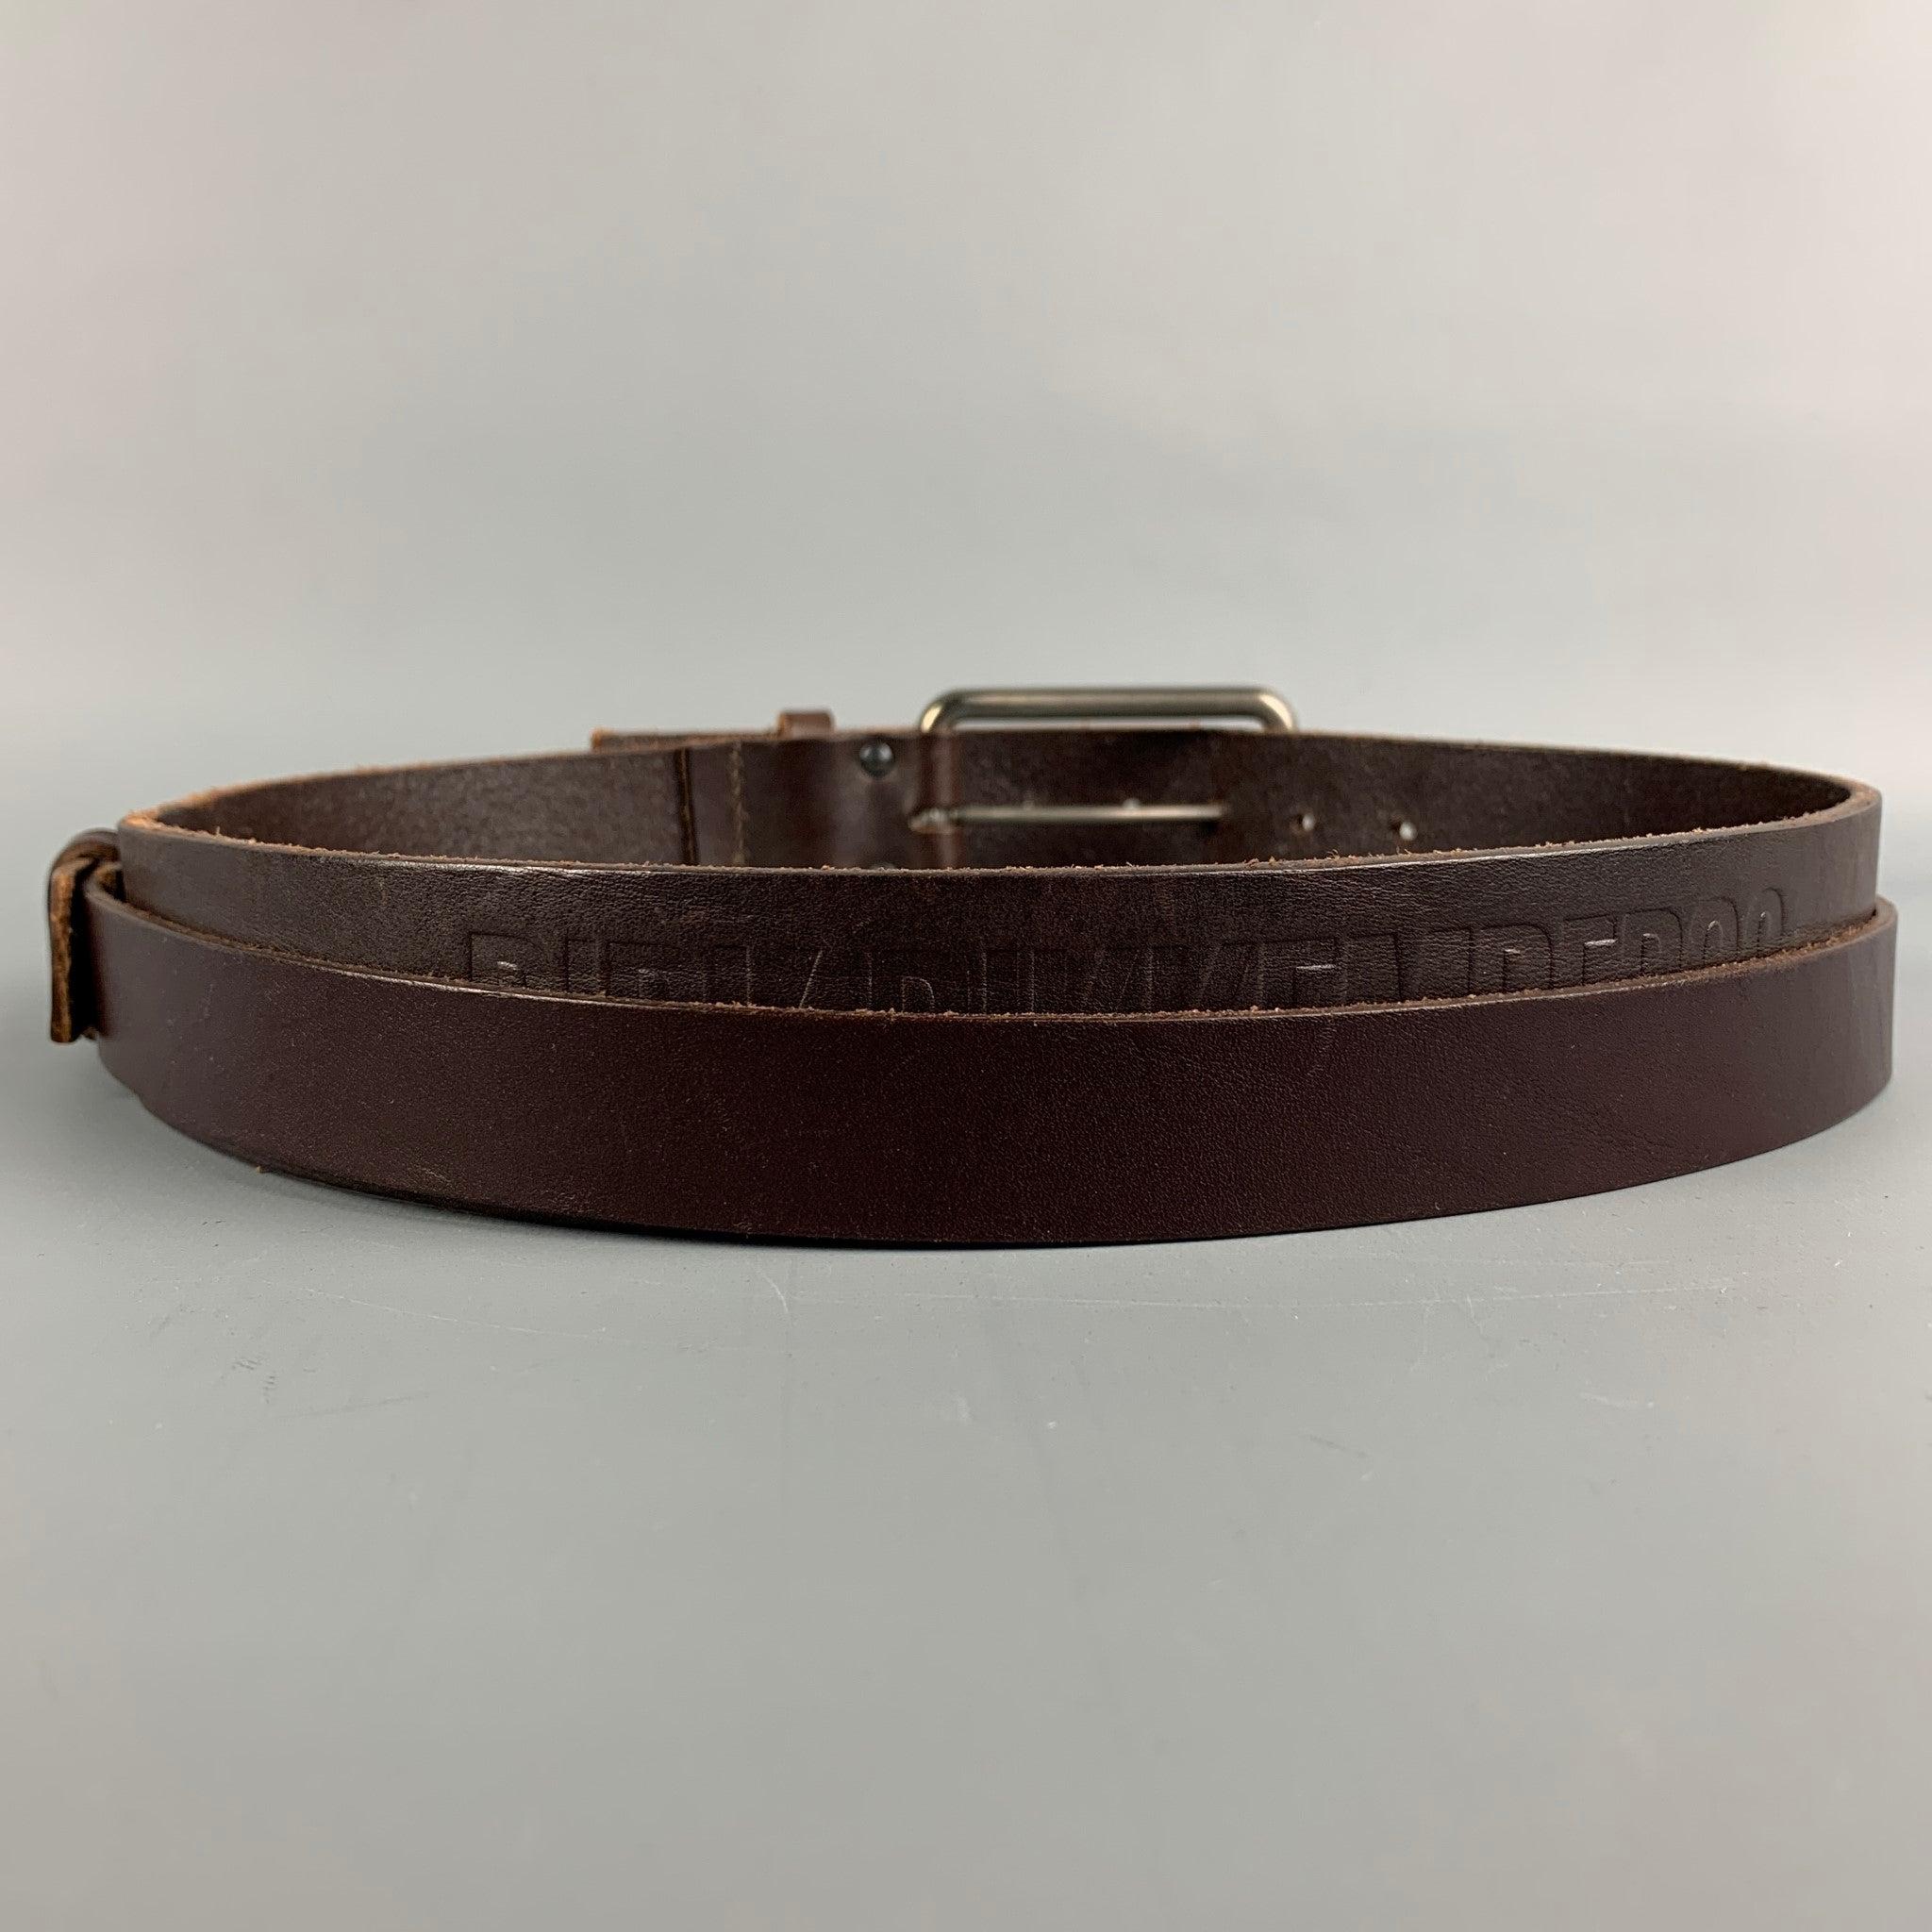 DIRK BIKKEMBERGS Size 30 Brown Leather Double Buckle Belt In Good Condition For Sale In San Francisco, CA